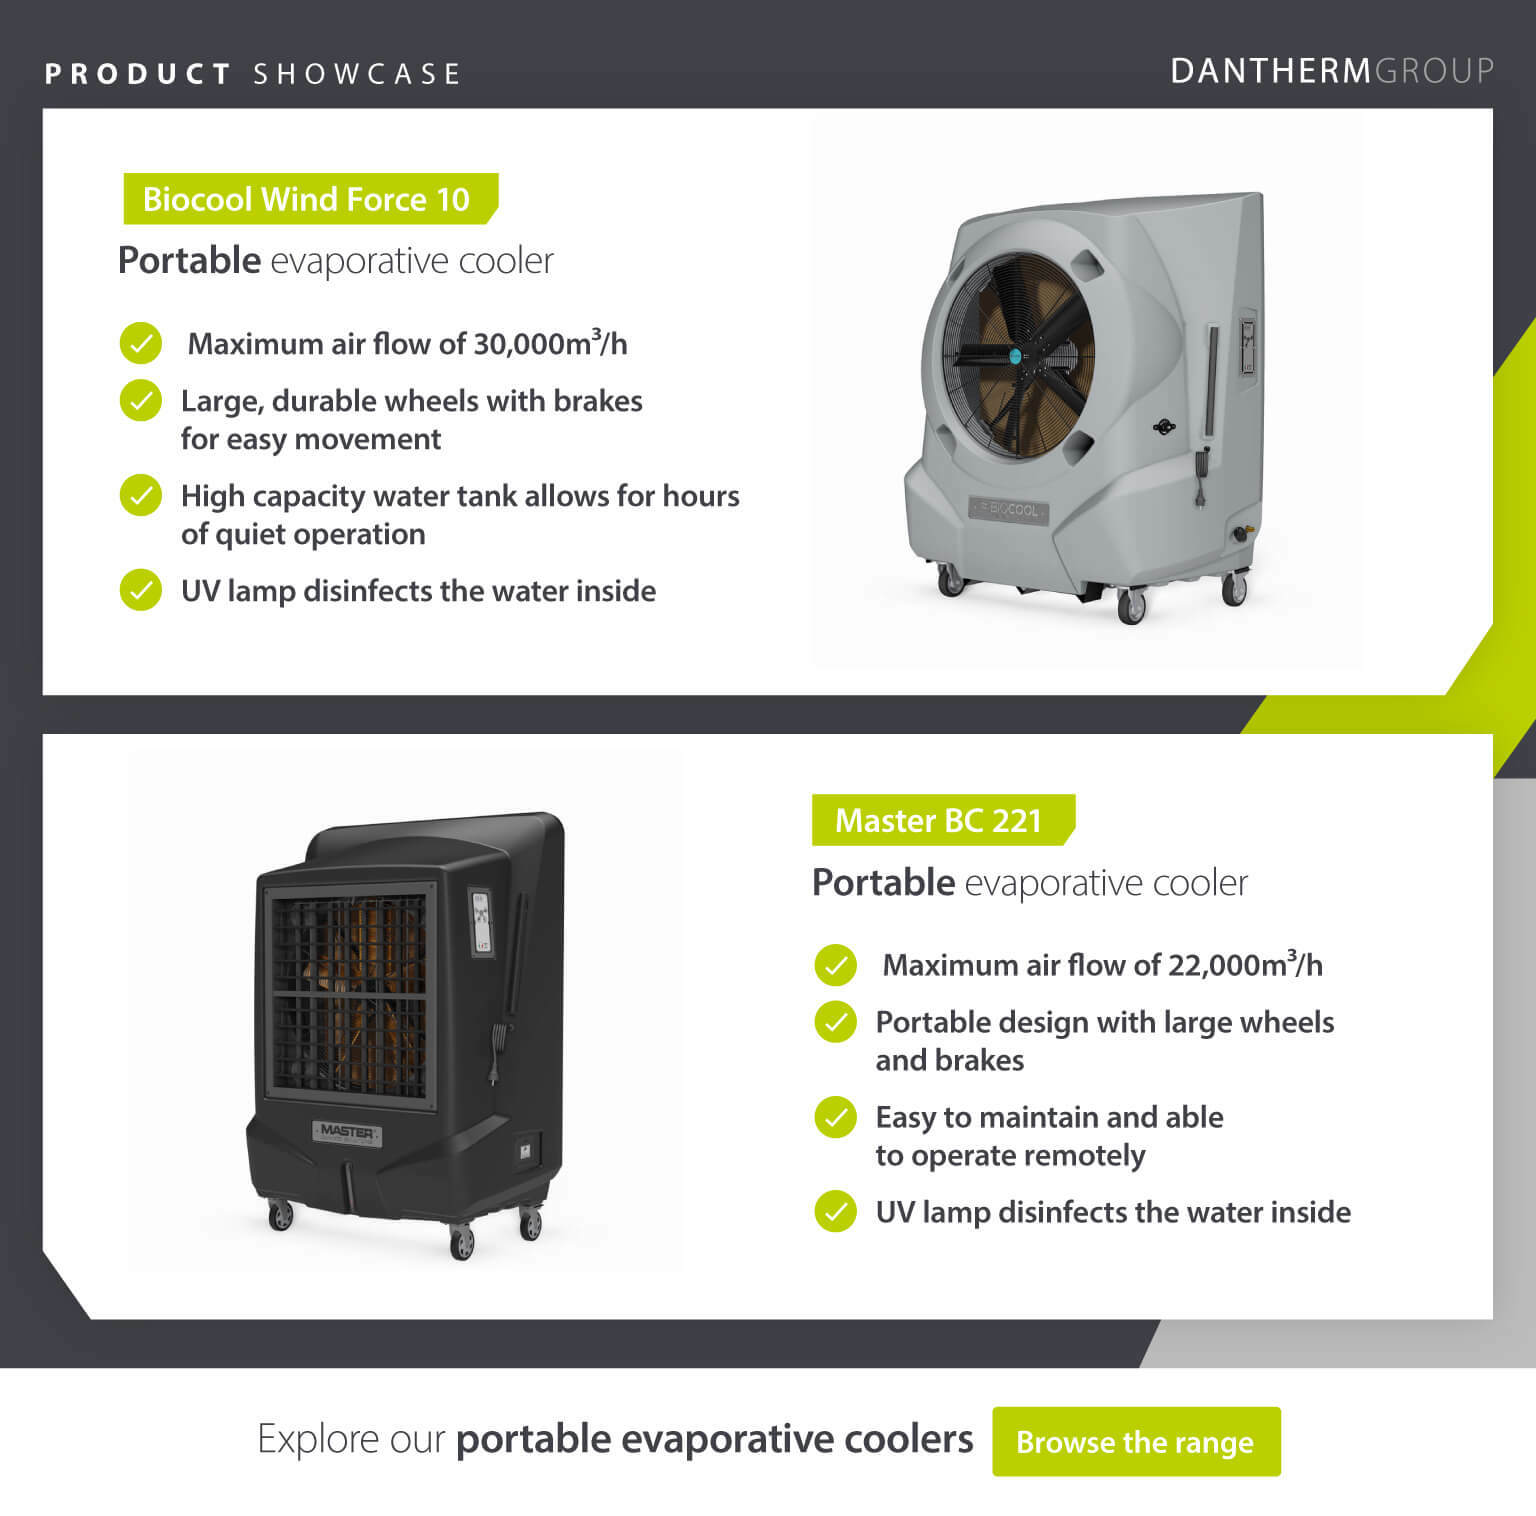 Product Showcase comparing 2 portable evaporative cooling units showing function and features information - Infographic image